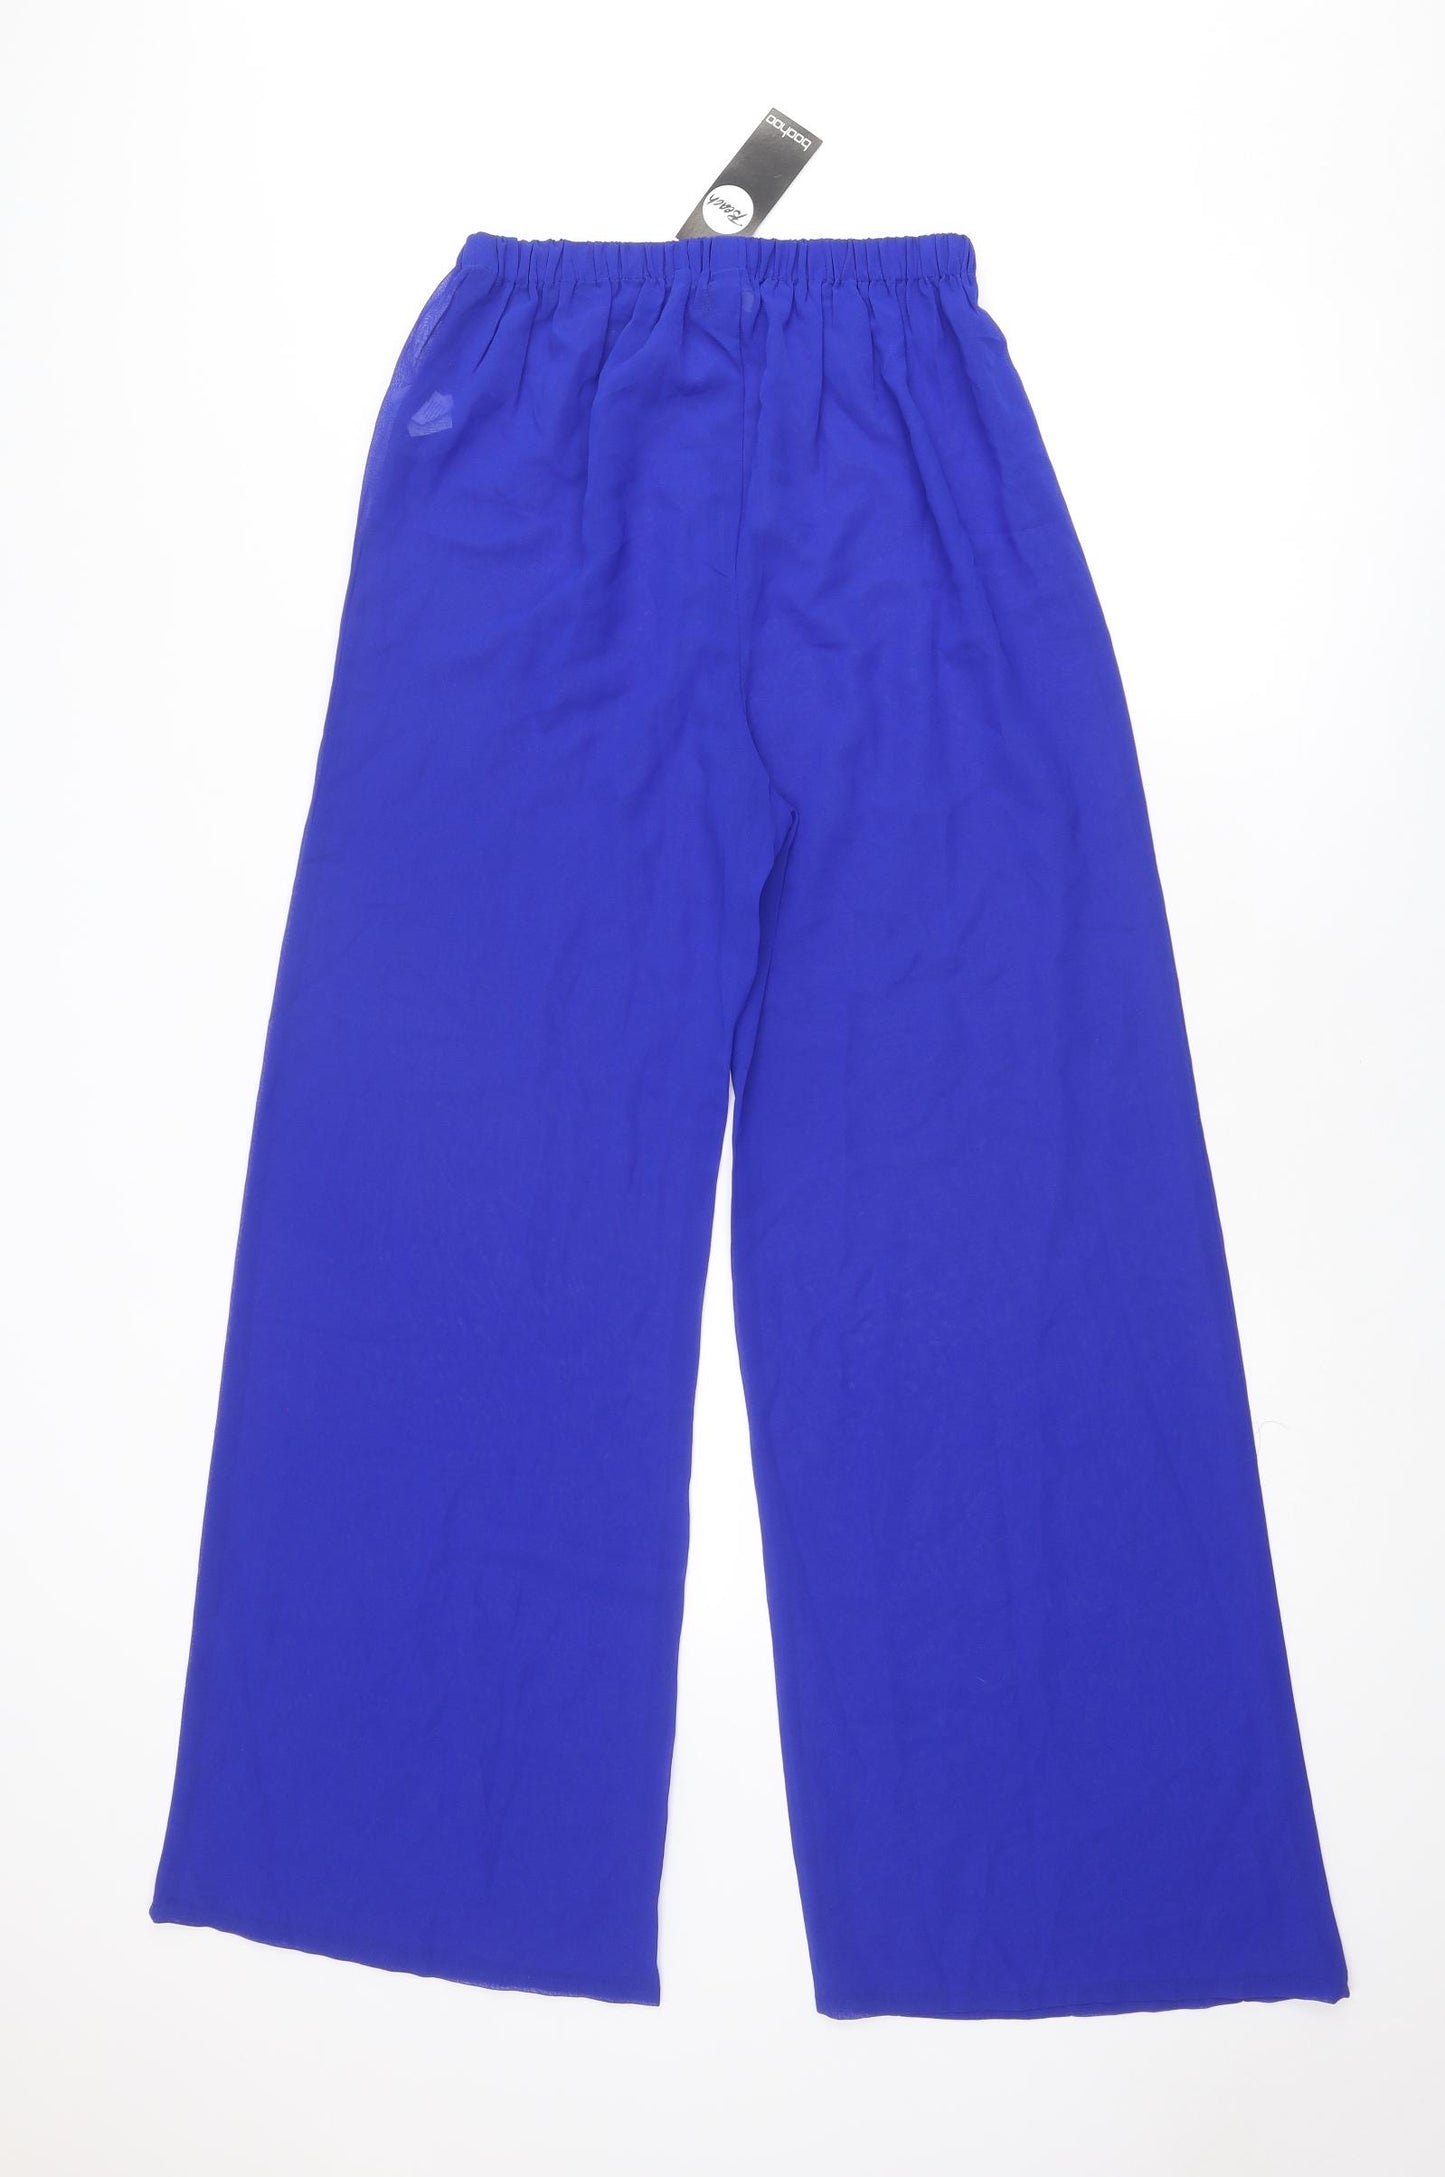 Boohoo Womens Blue Polyester Jogger Trousers Size L Regular